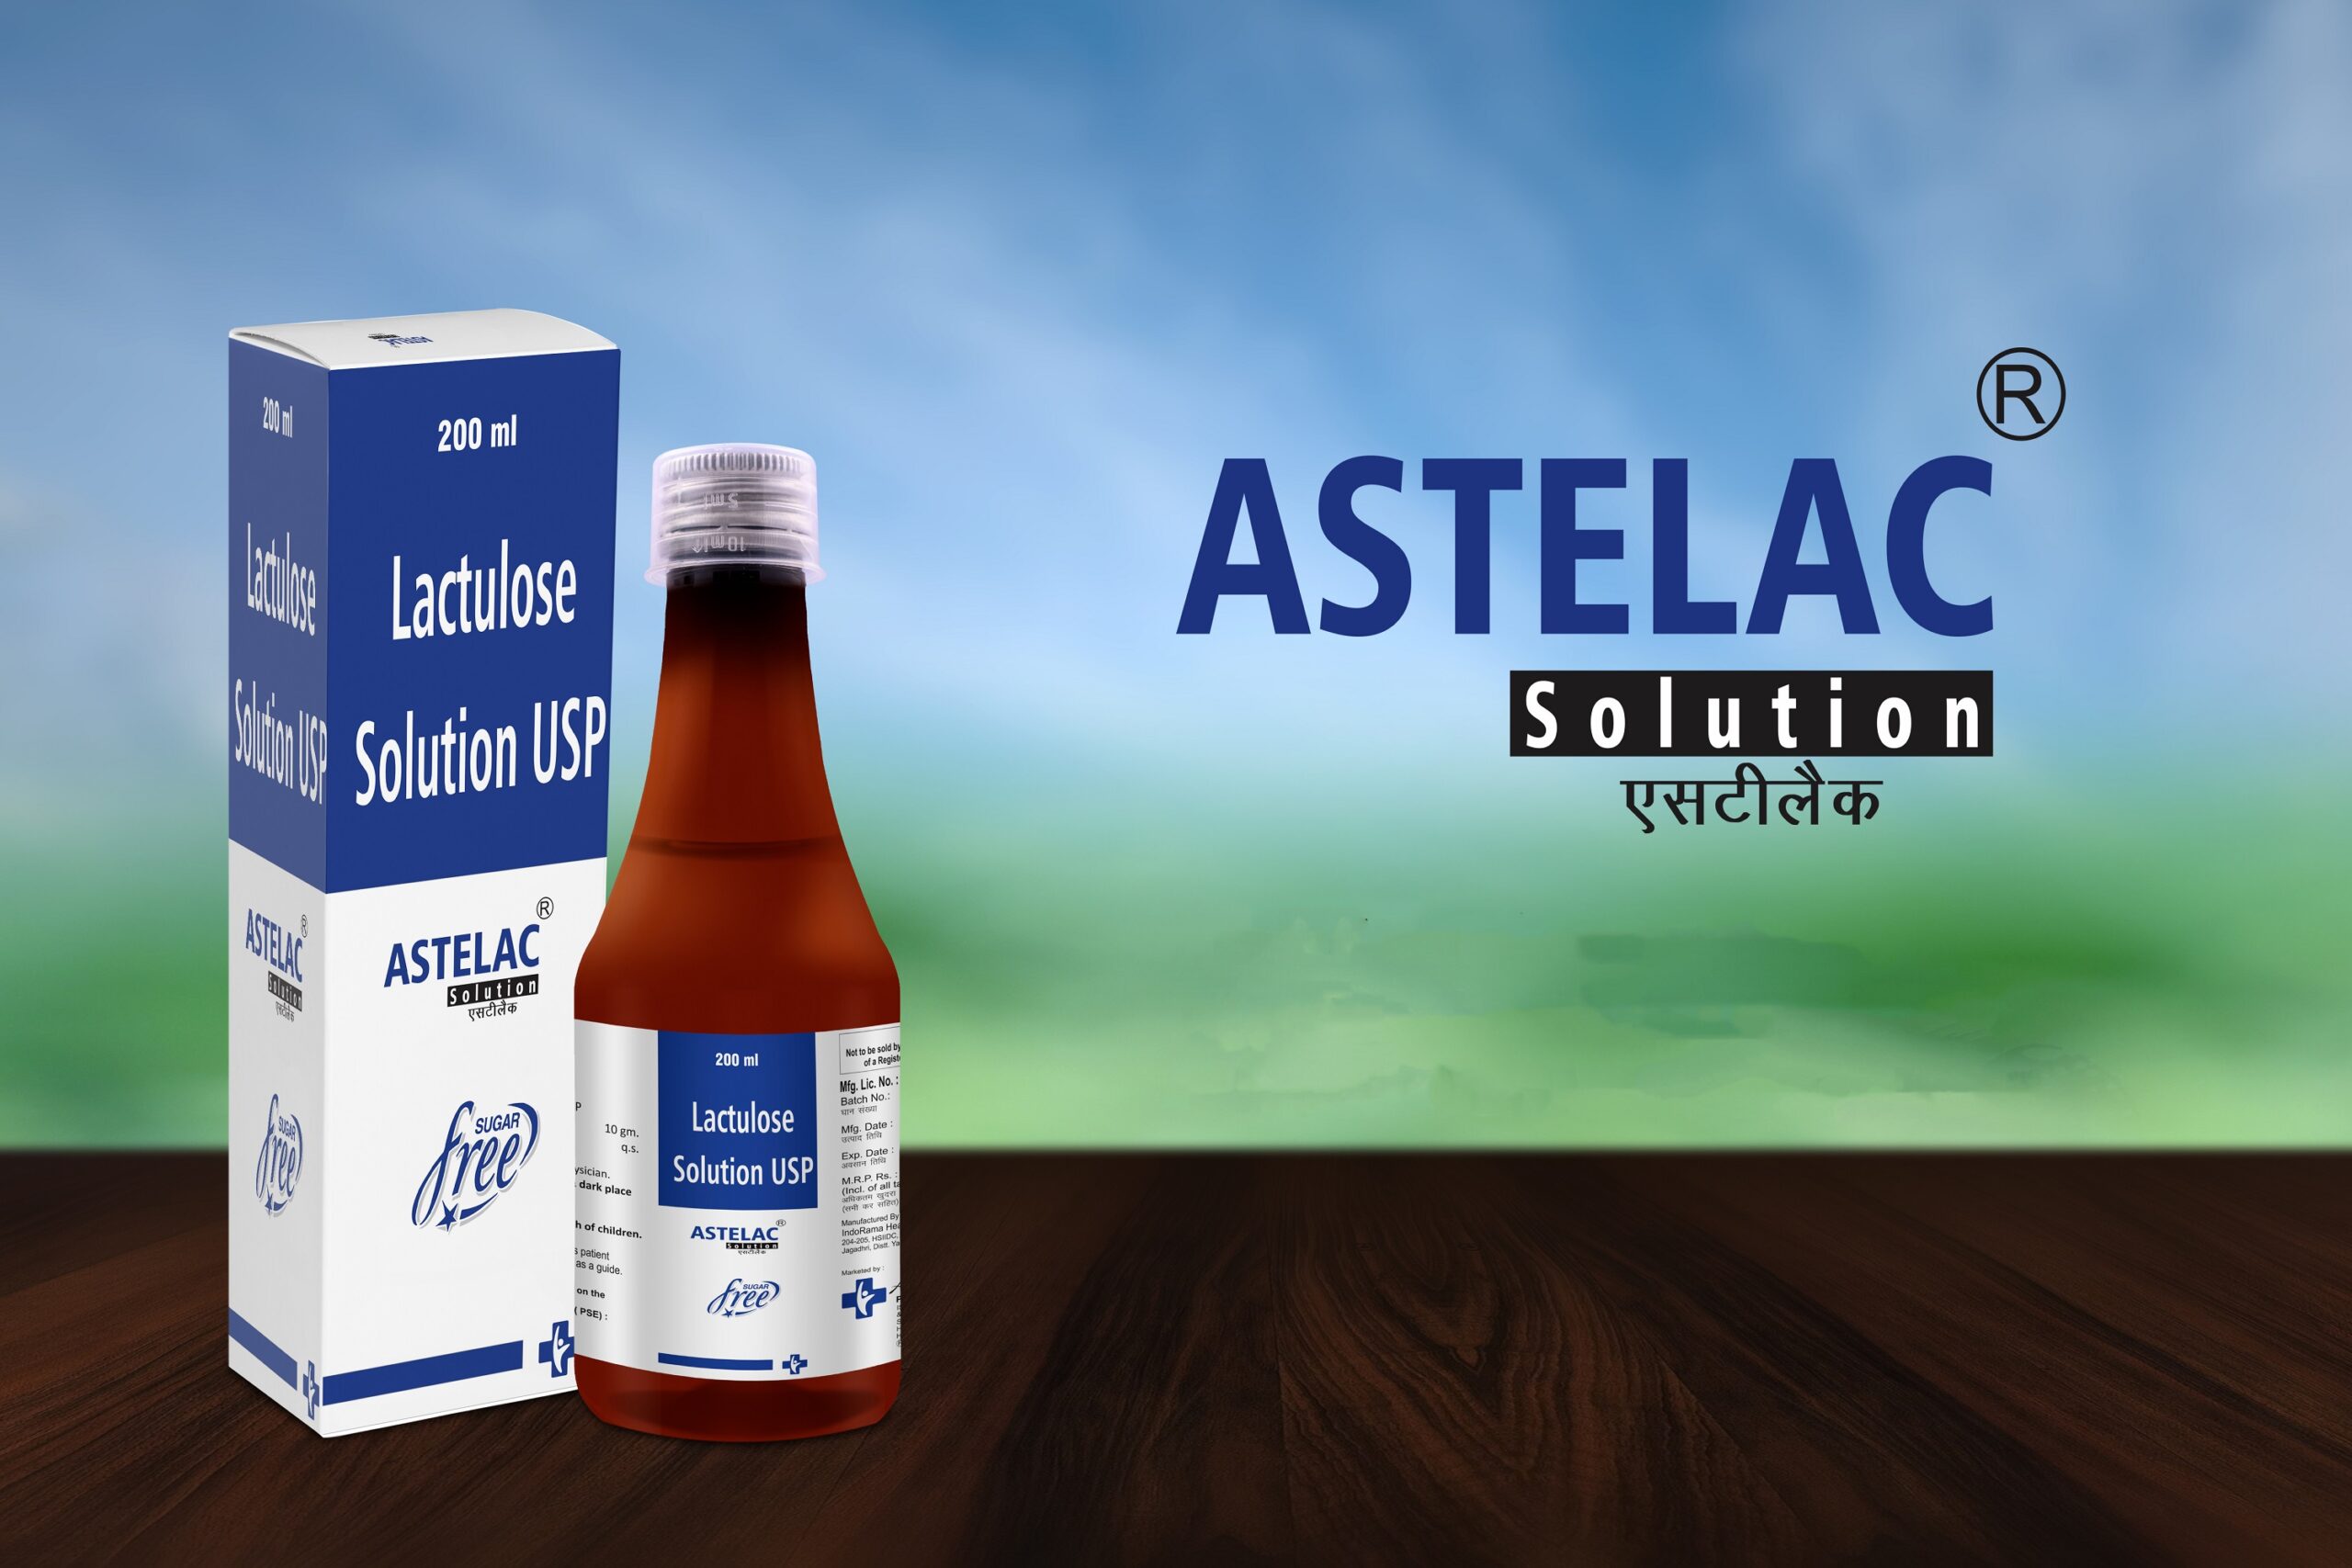 Astelac solution